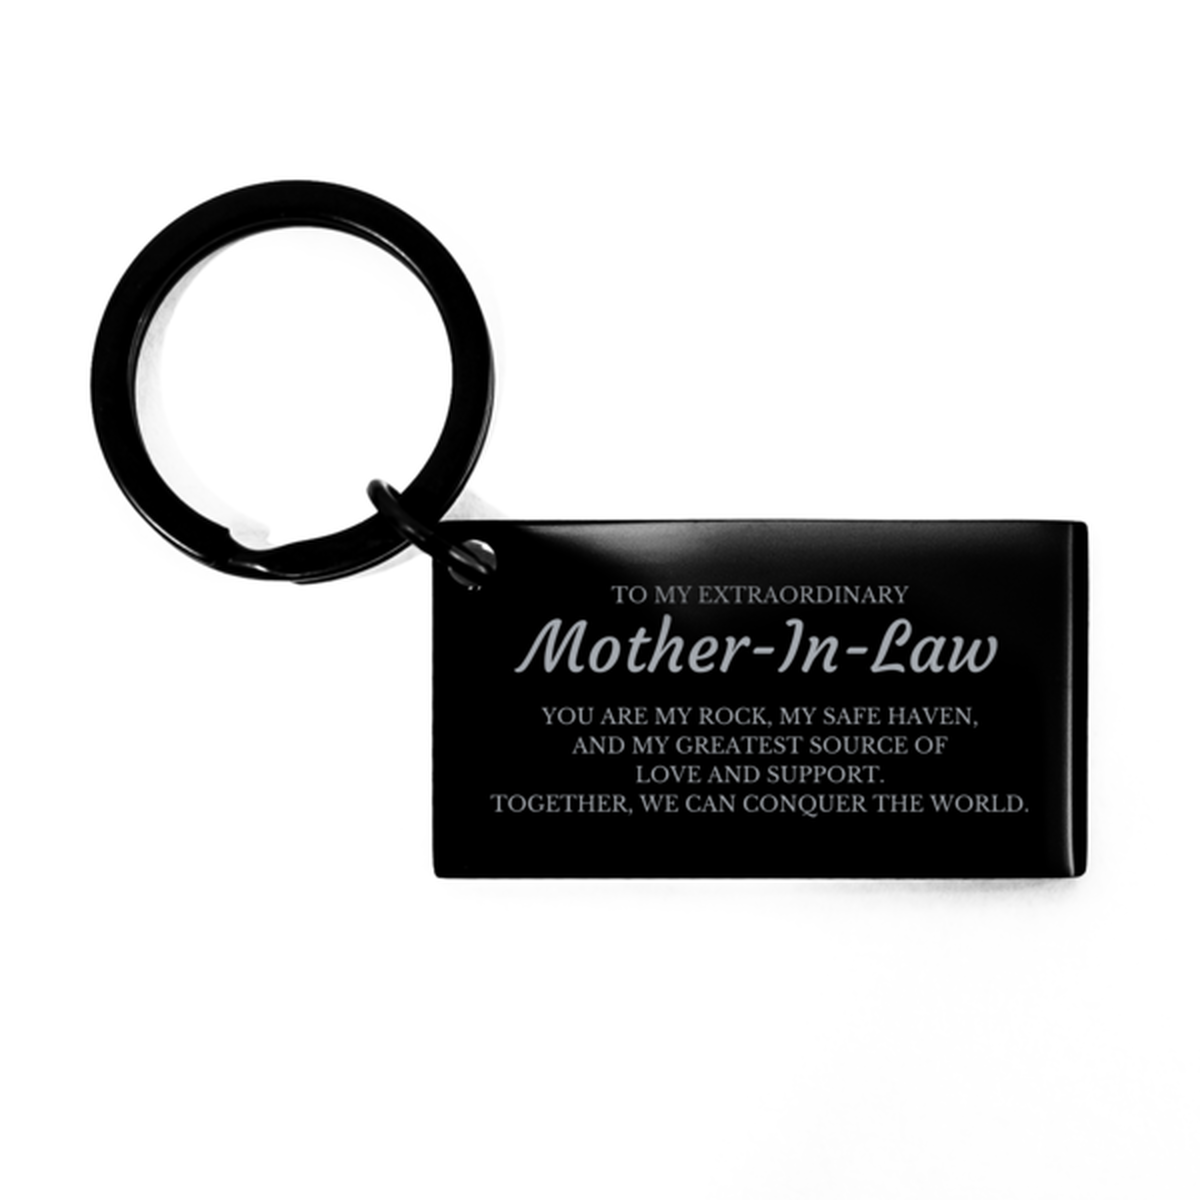 To My Extraordinary Mother-In-Law Gifts, Together, we can conquer the world, Birthday Keychain For Mother-In-Law, Christmas Gifts For Mother-In-Law